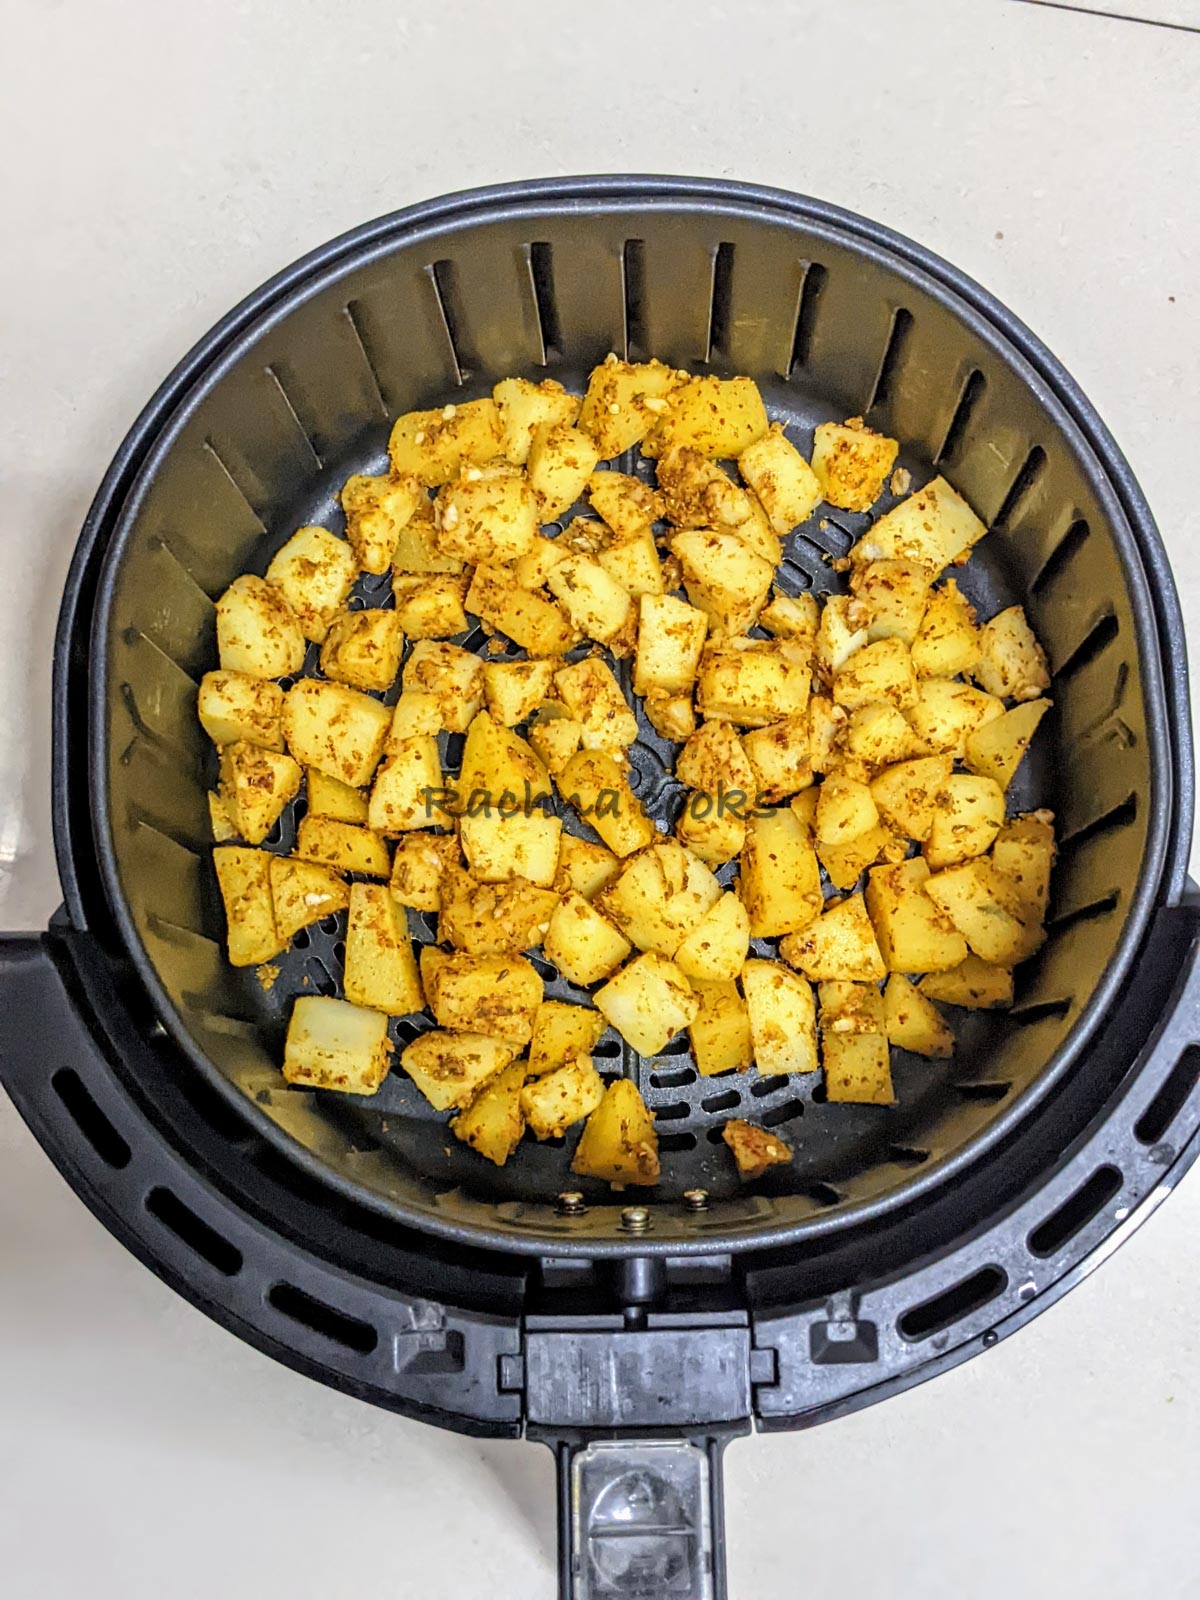 Potato cubes with spices and oil in air fryer basket.